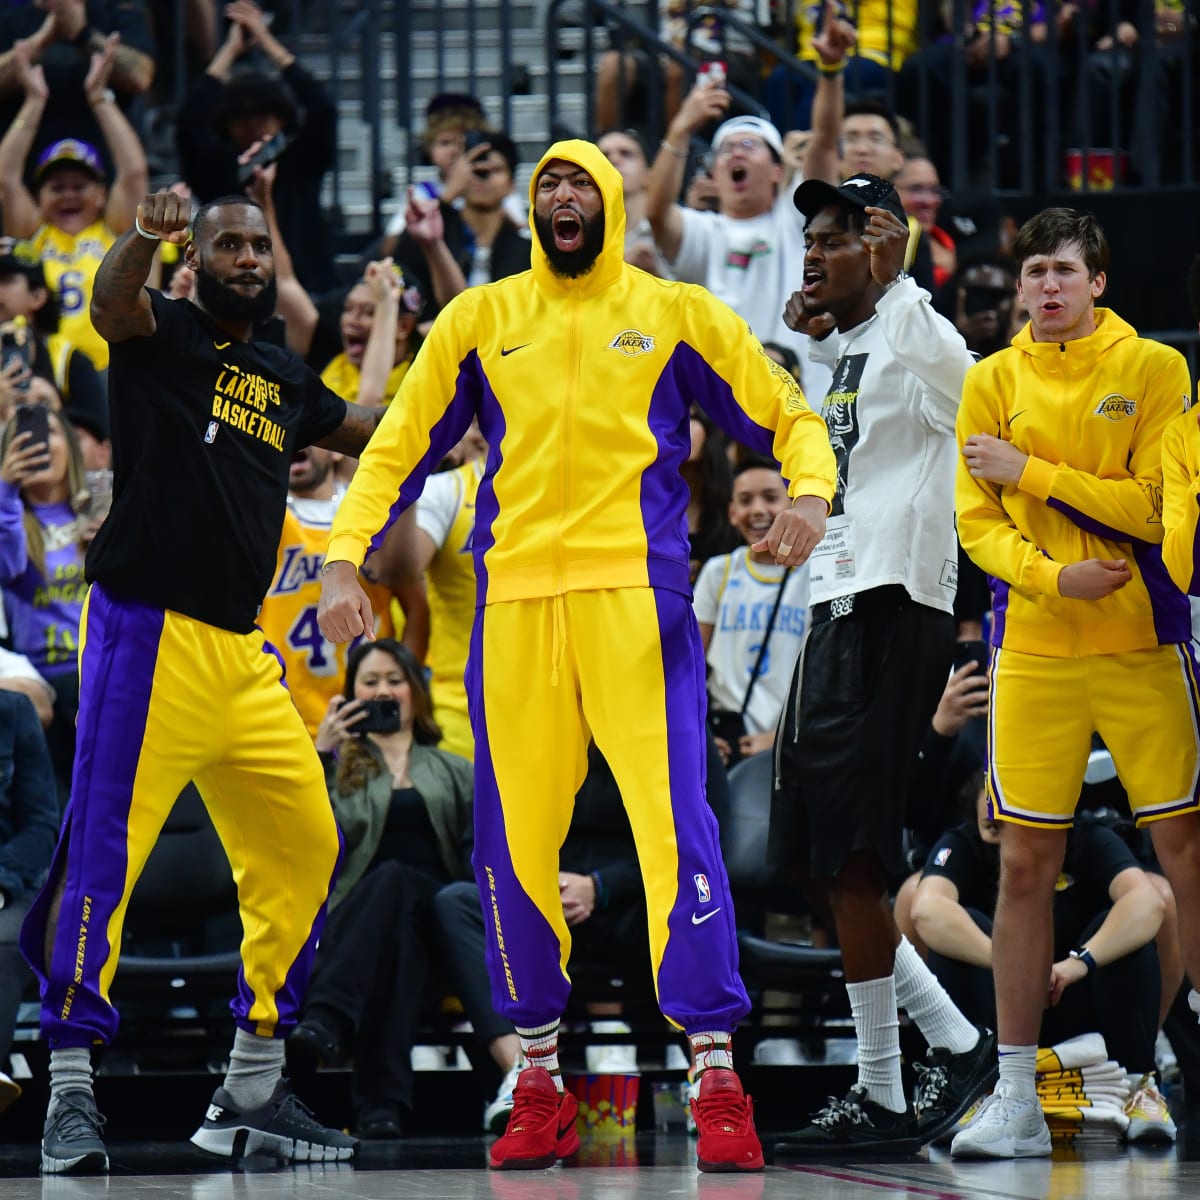 Uni Watch - Los Angeles Lakers bring back Showtime with latest